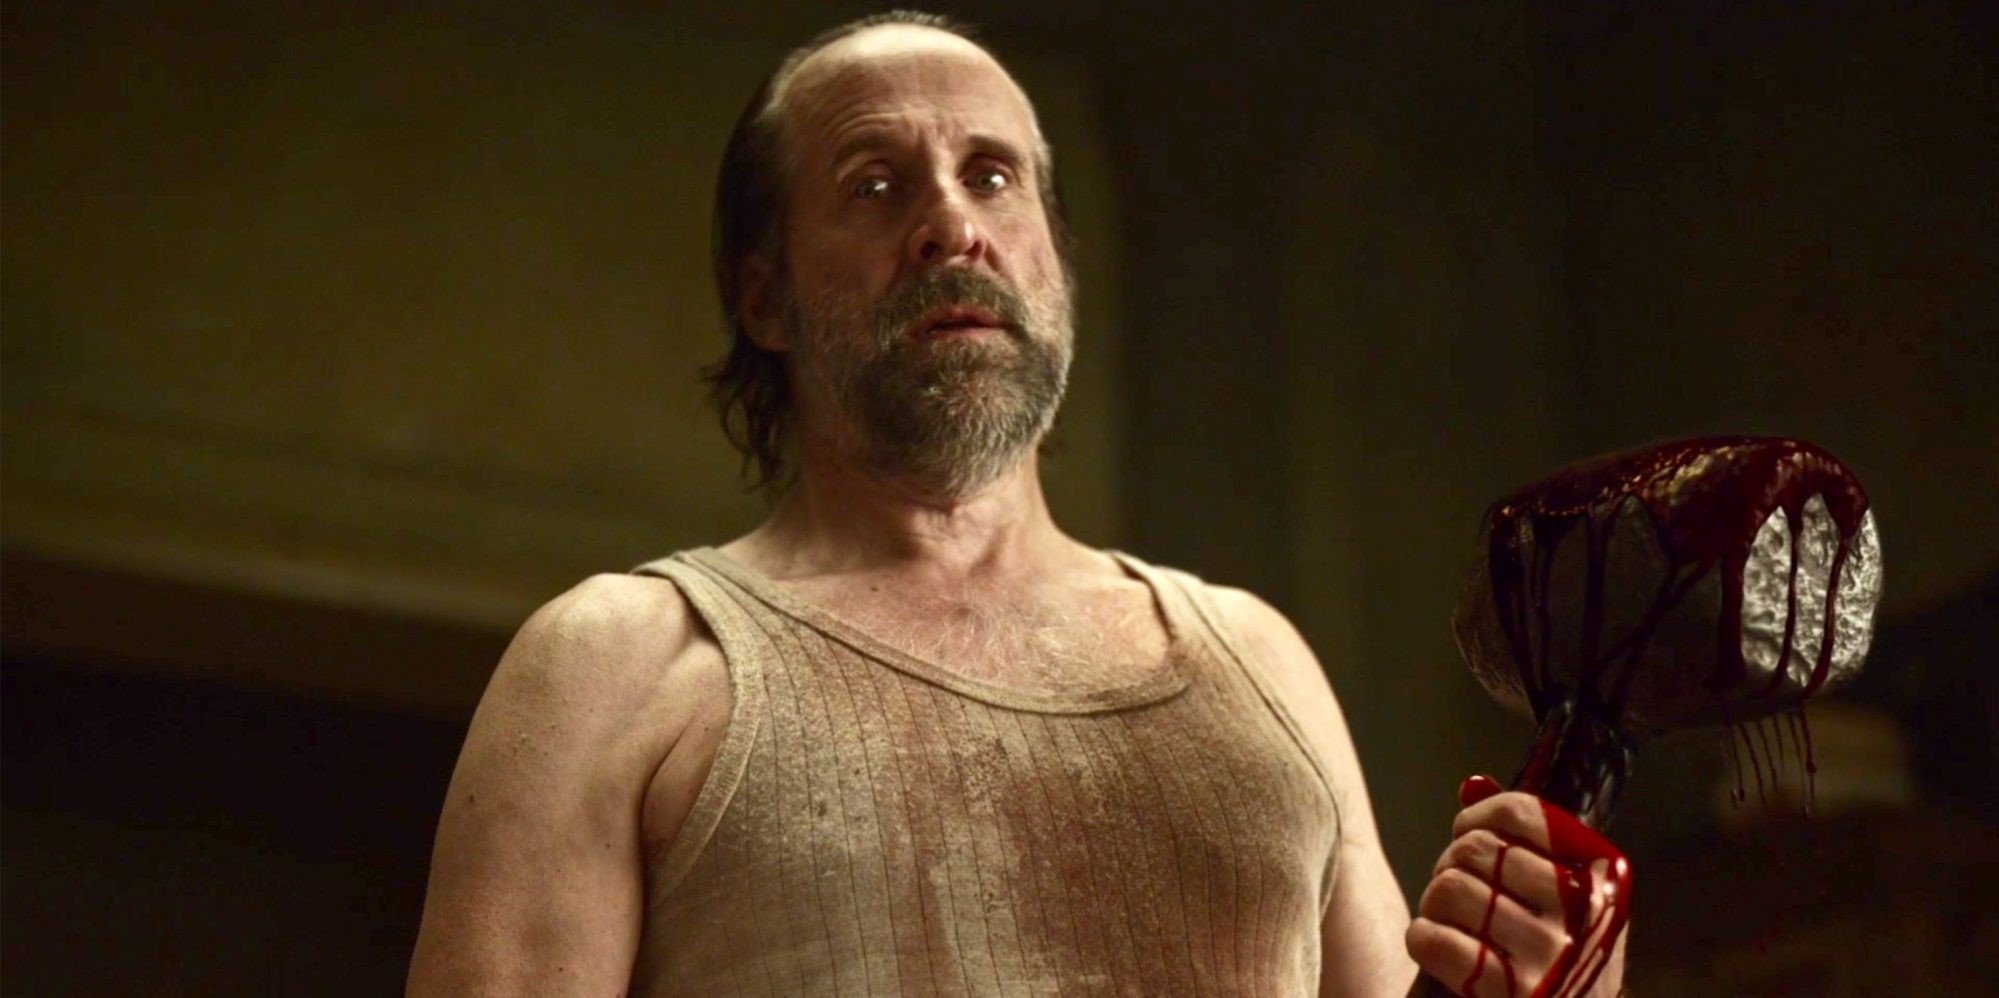 Peter Stormare - Journey From Sweden To Hollywood